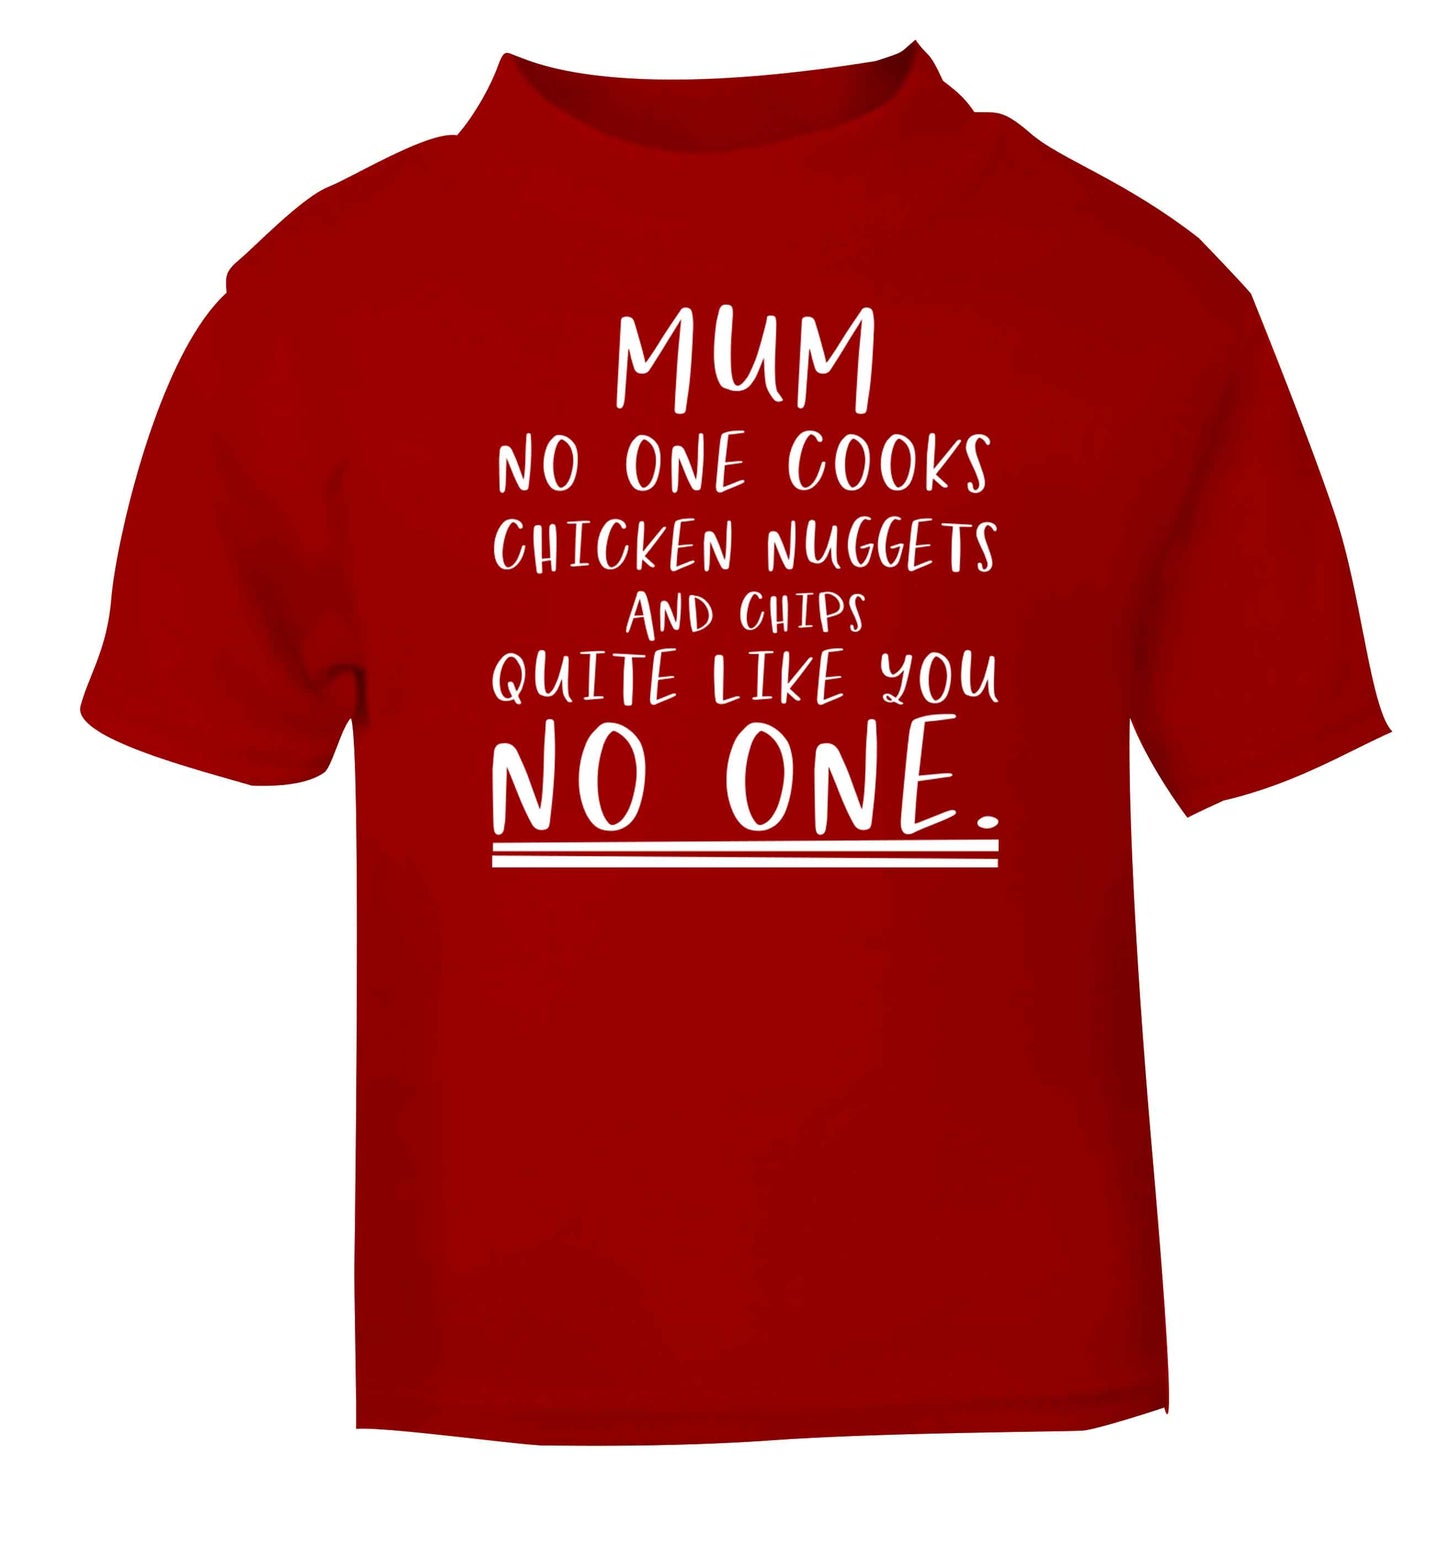 Super funny sassy gift for mother's day or birthday!  Mum no one cooks chicken nuggets and chips like you no one red baby toddler Tshirt 2 Years